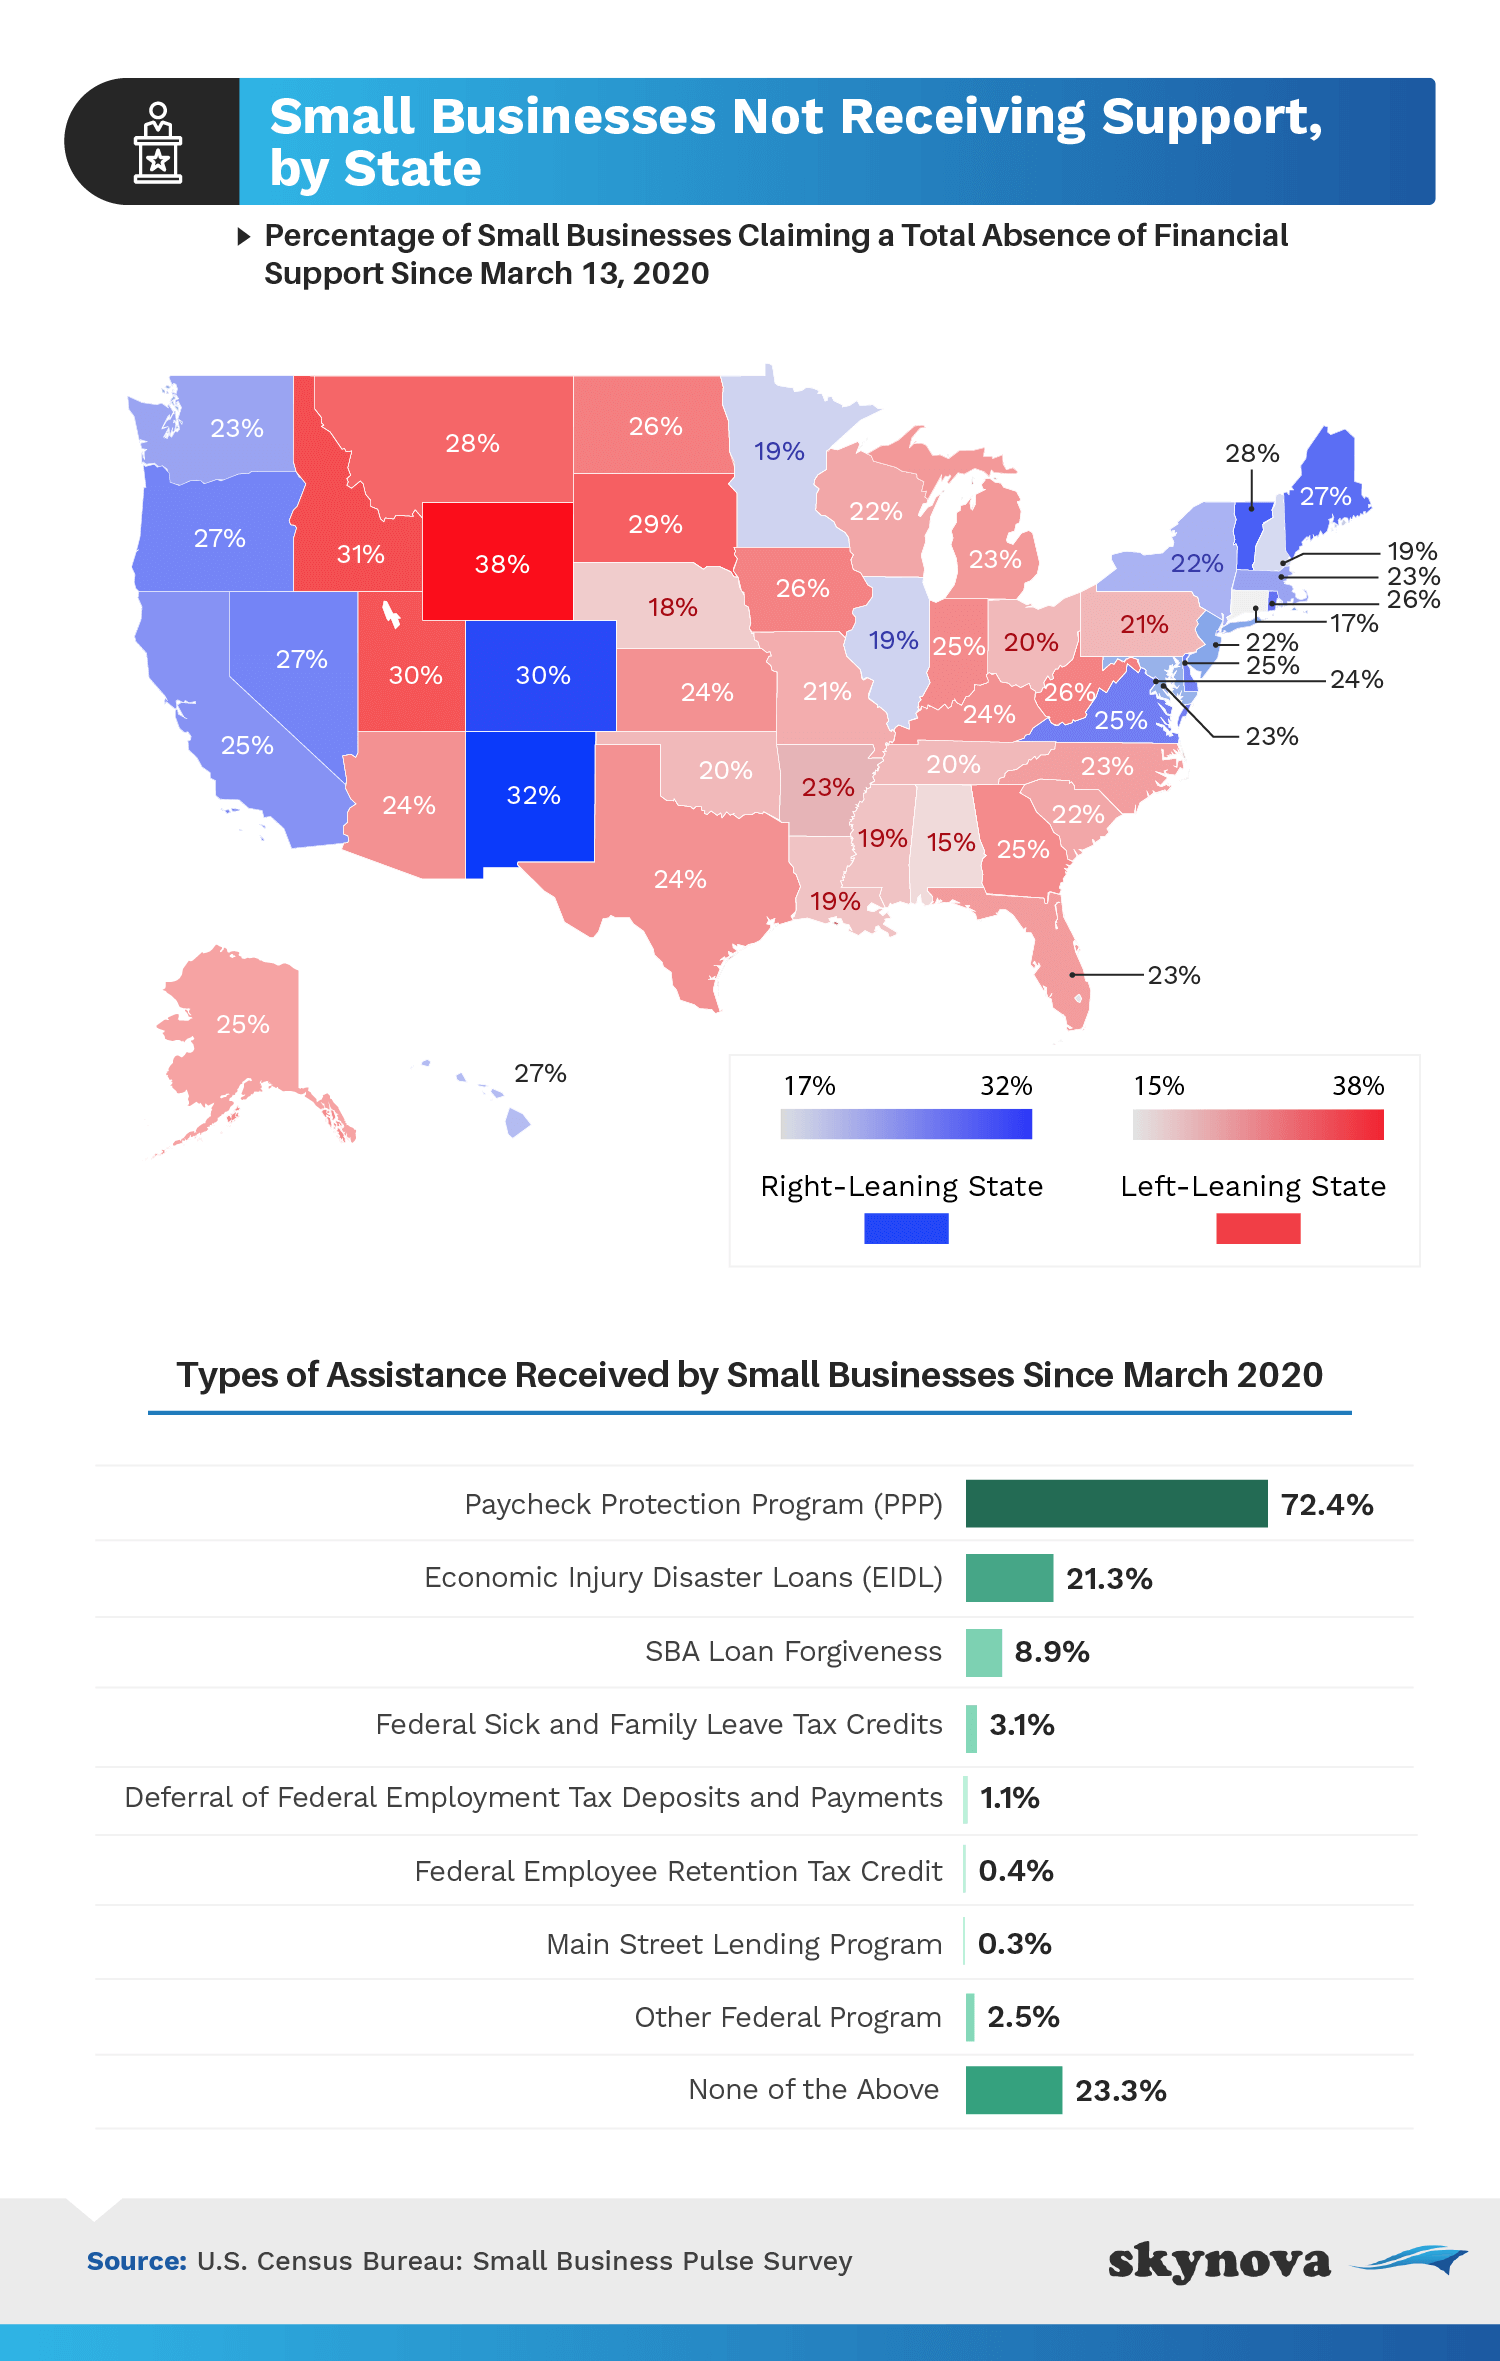 Small business support by state